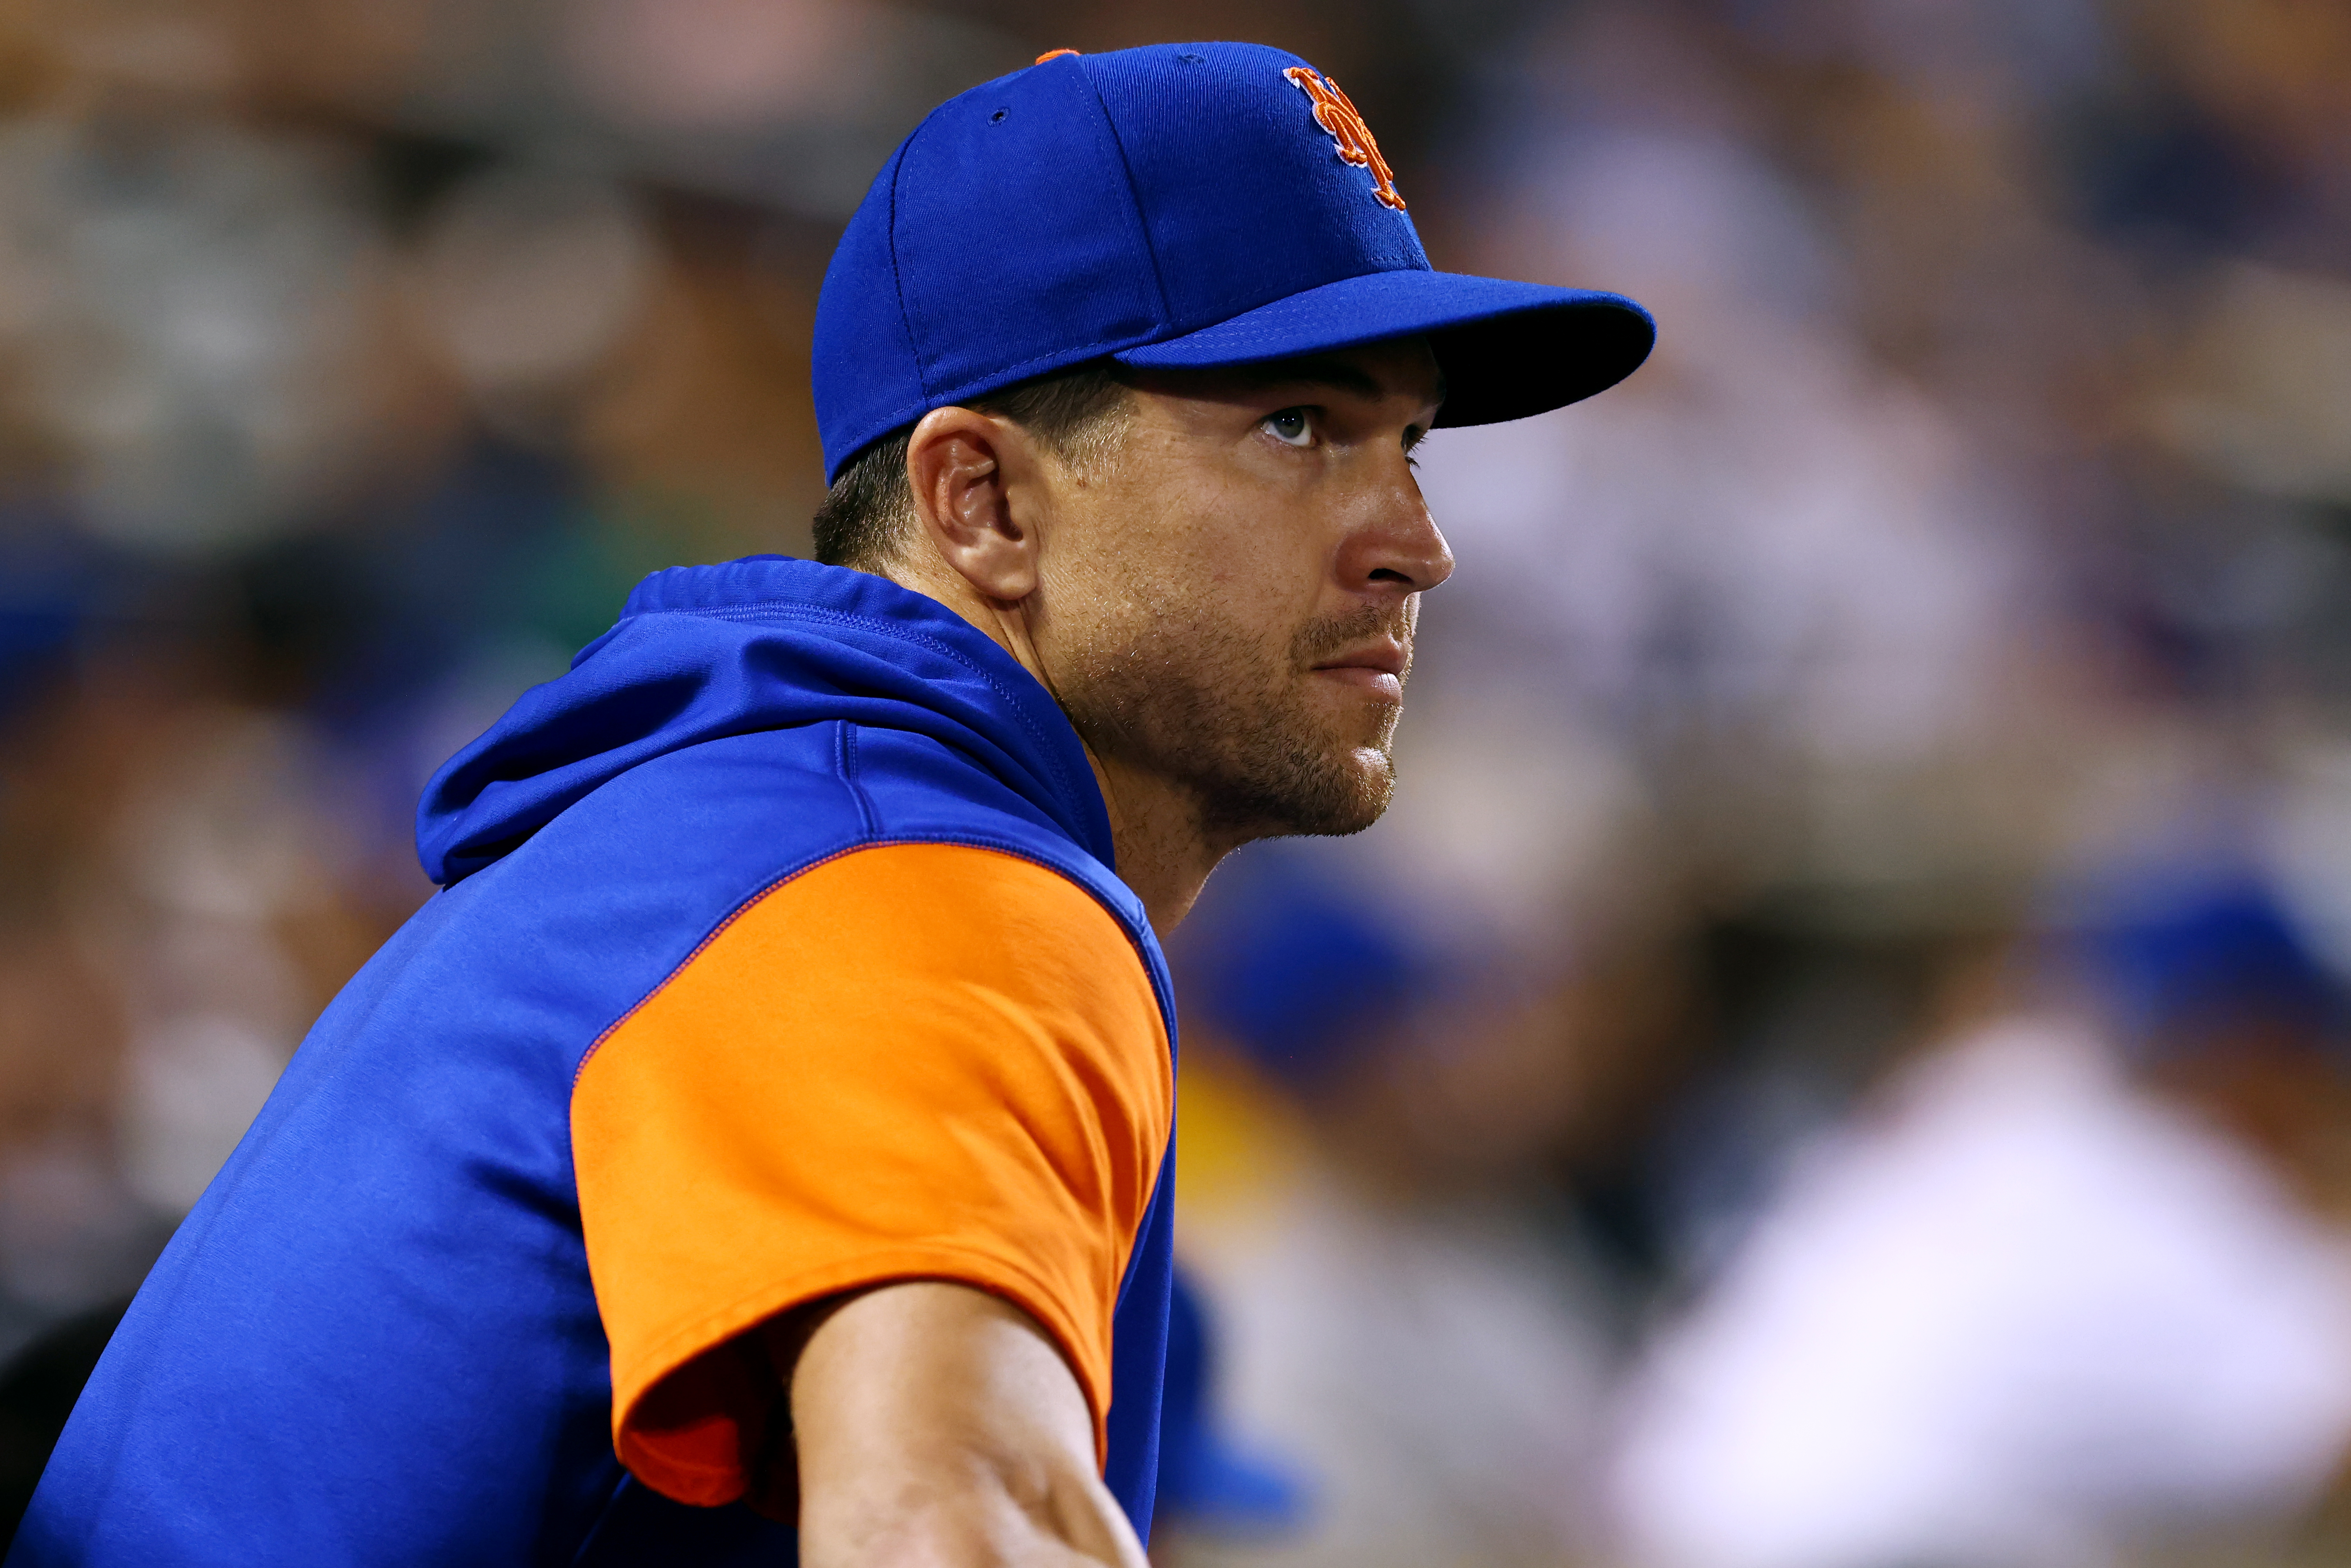 Jacob deGrom injury update: Mets SP placed on 10-day IL with